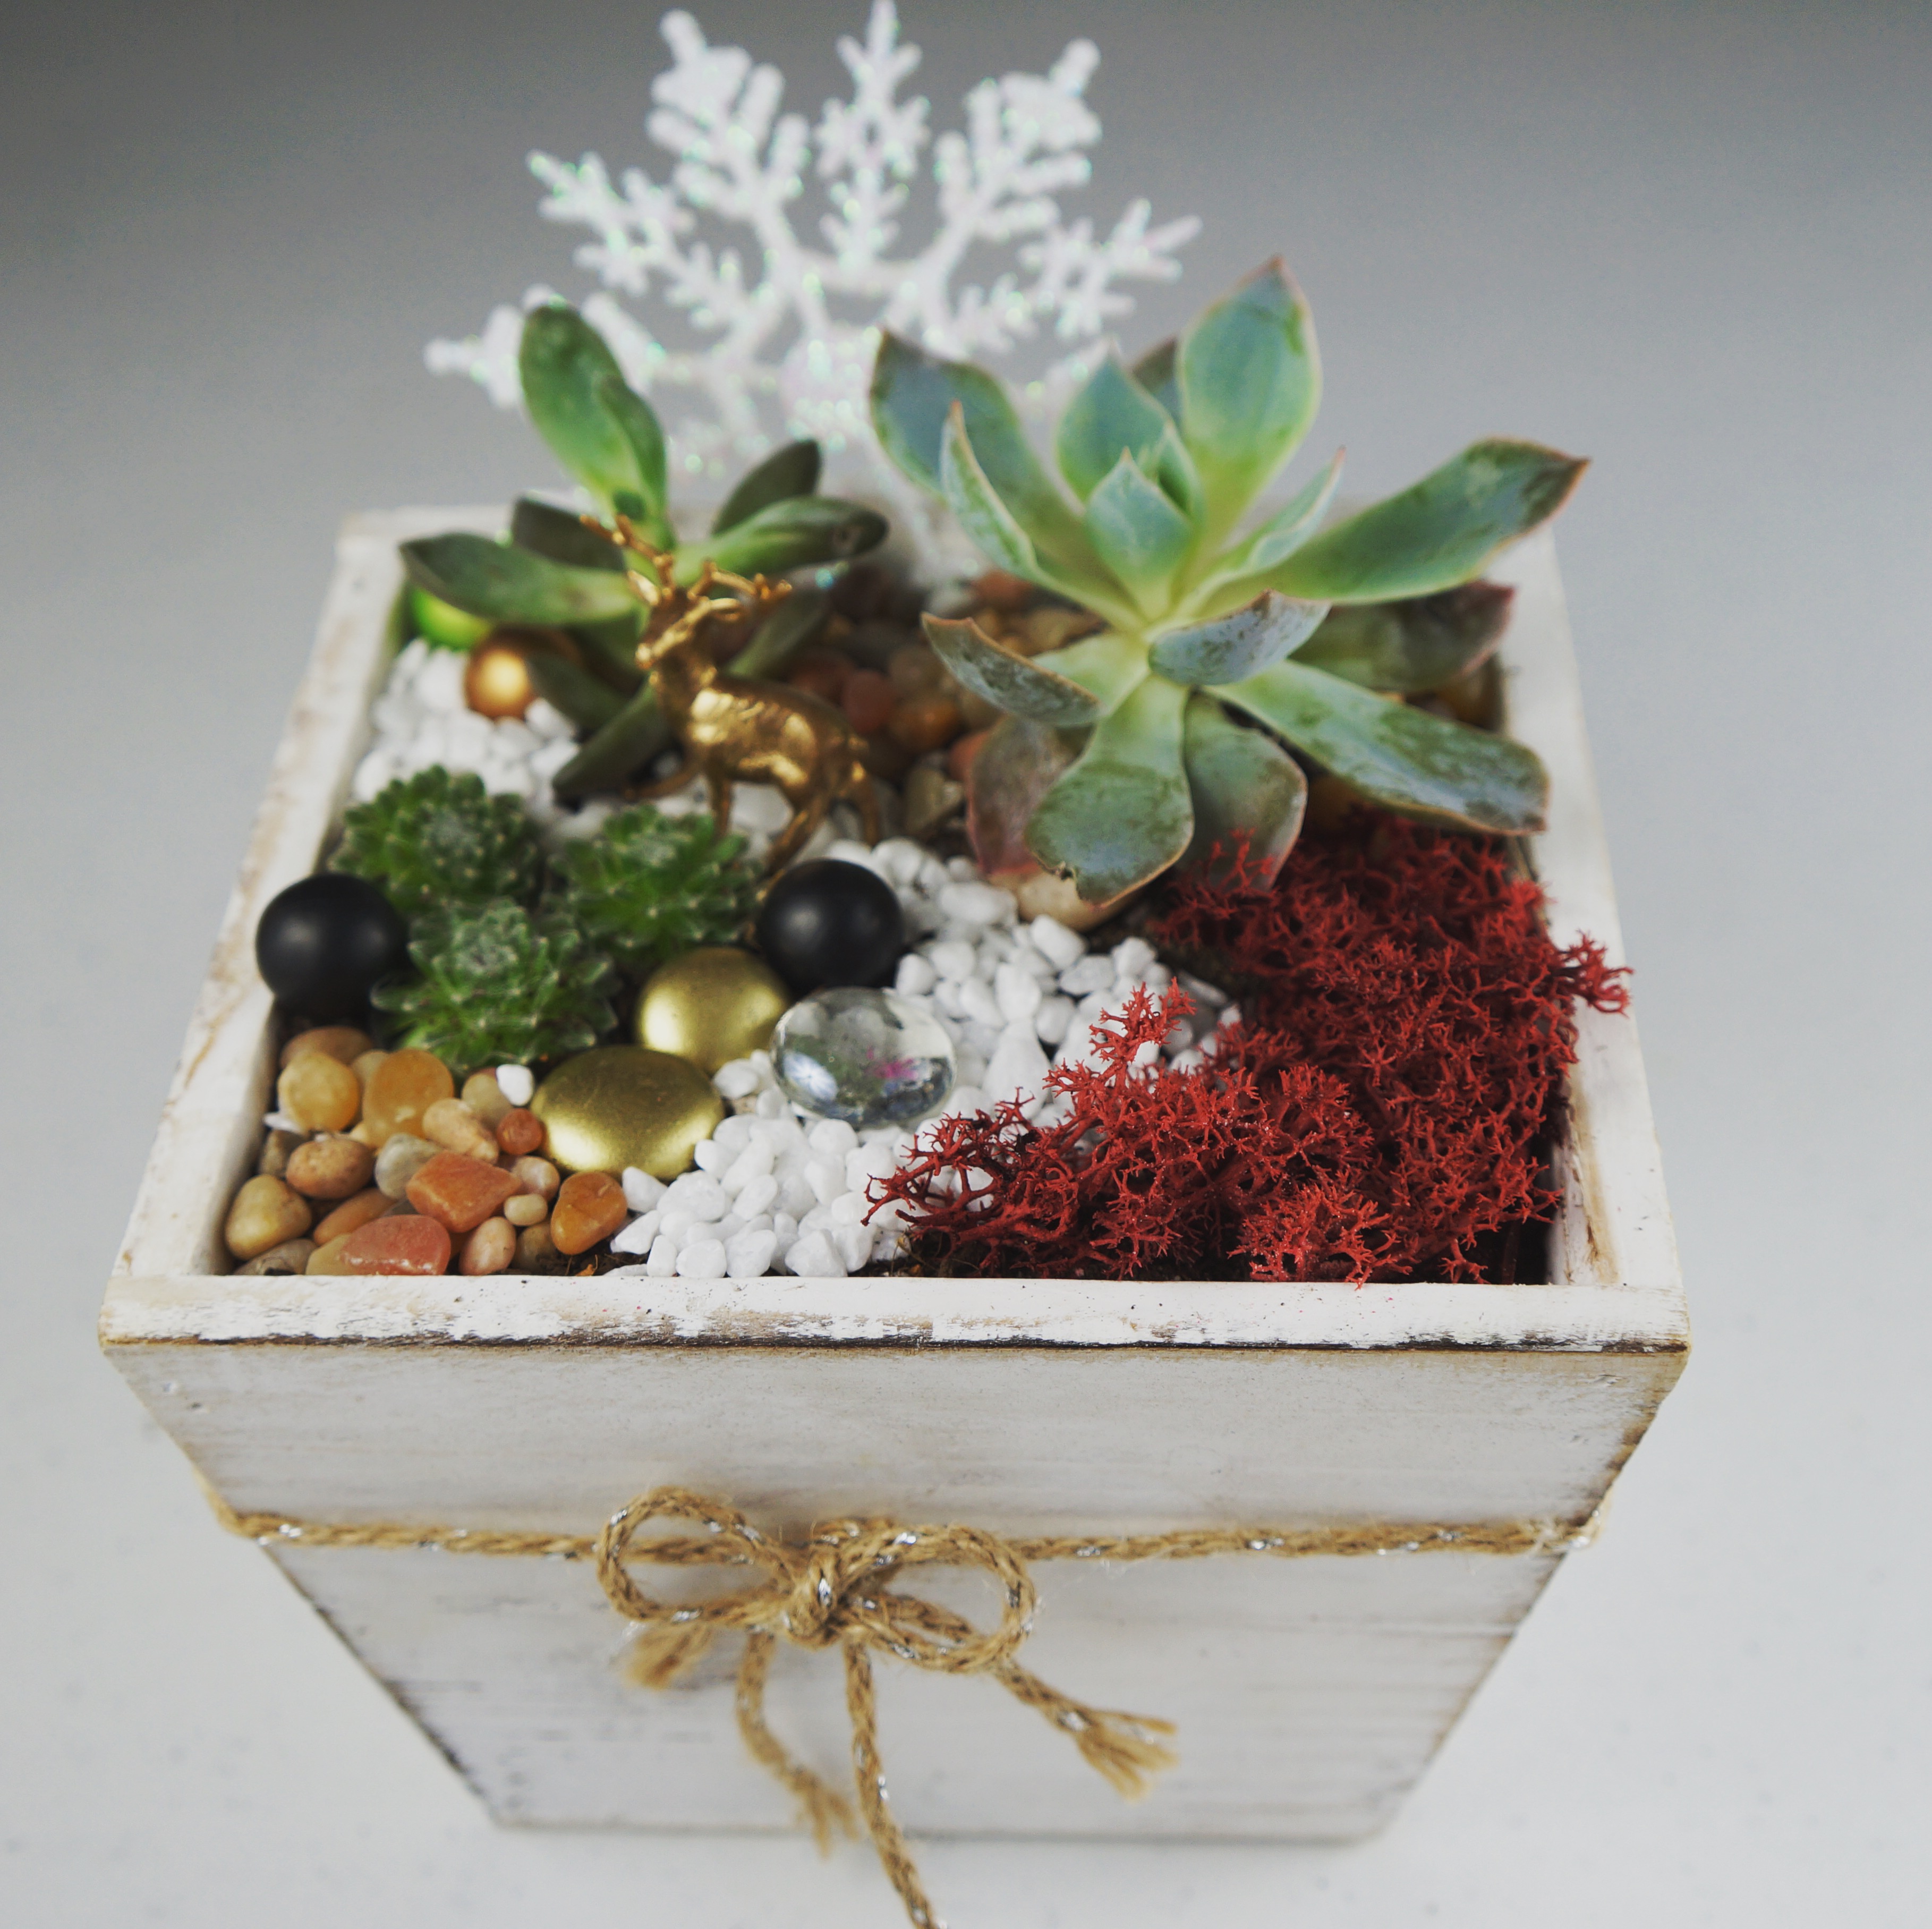 A Christmas Shine plant nite project by Yaymaker